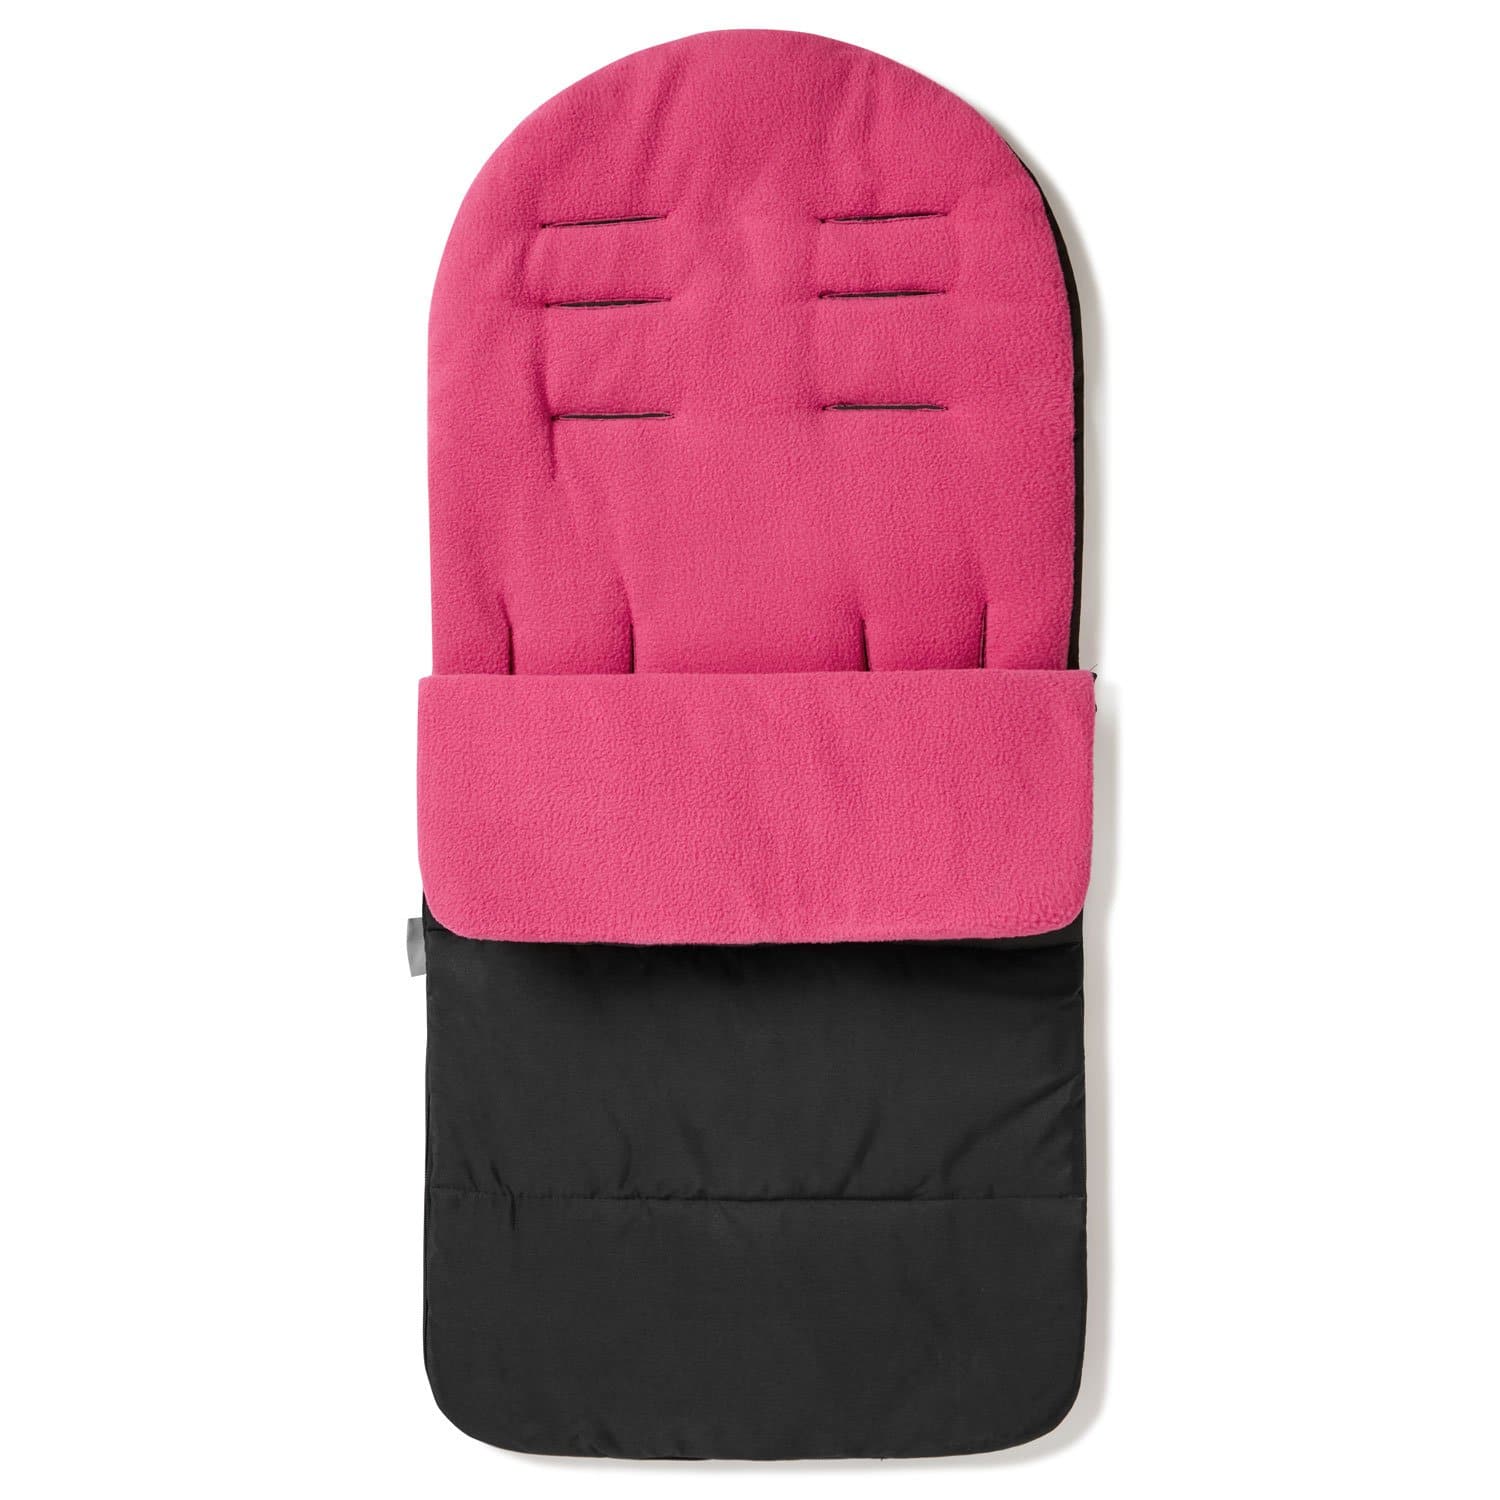 Premium Footmuff / Cosy Toes Compatible with Kiddicouture - Pink Rose / Fits All Models | For Your Little One